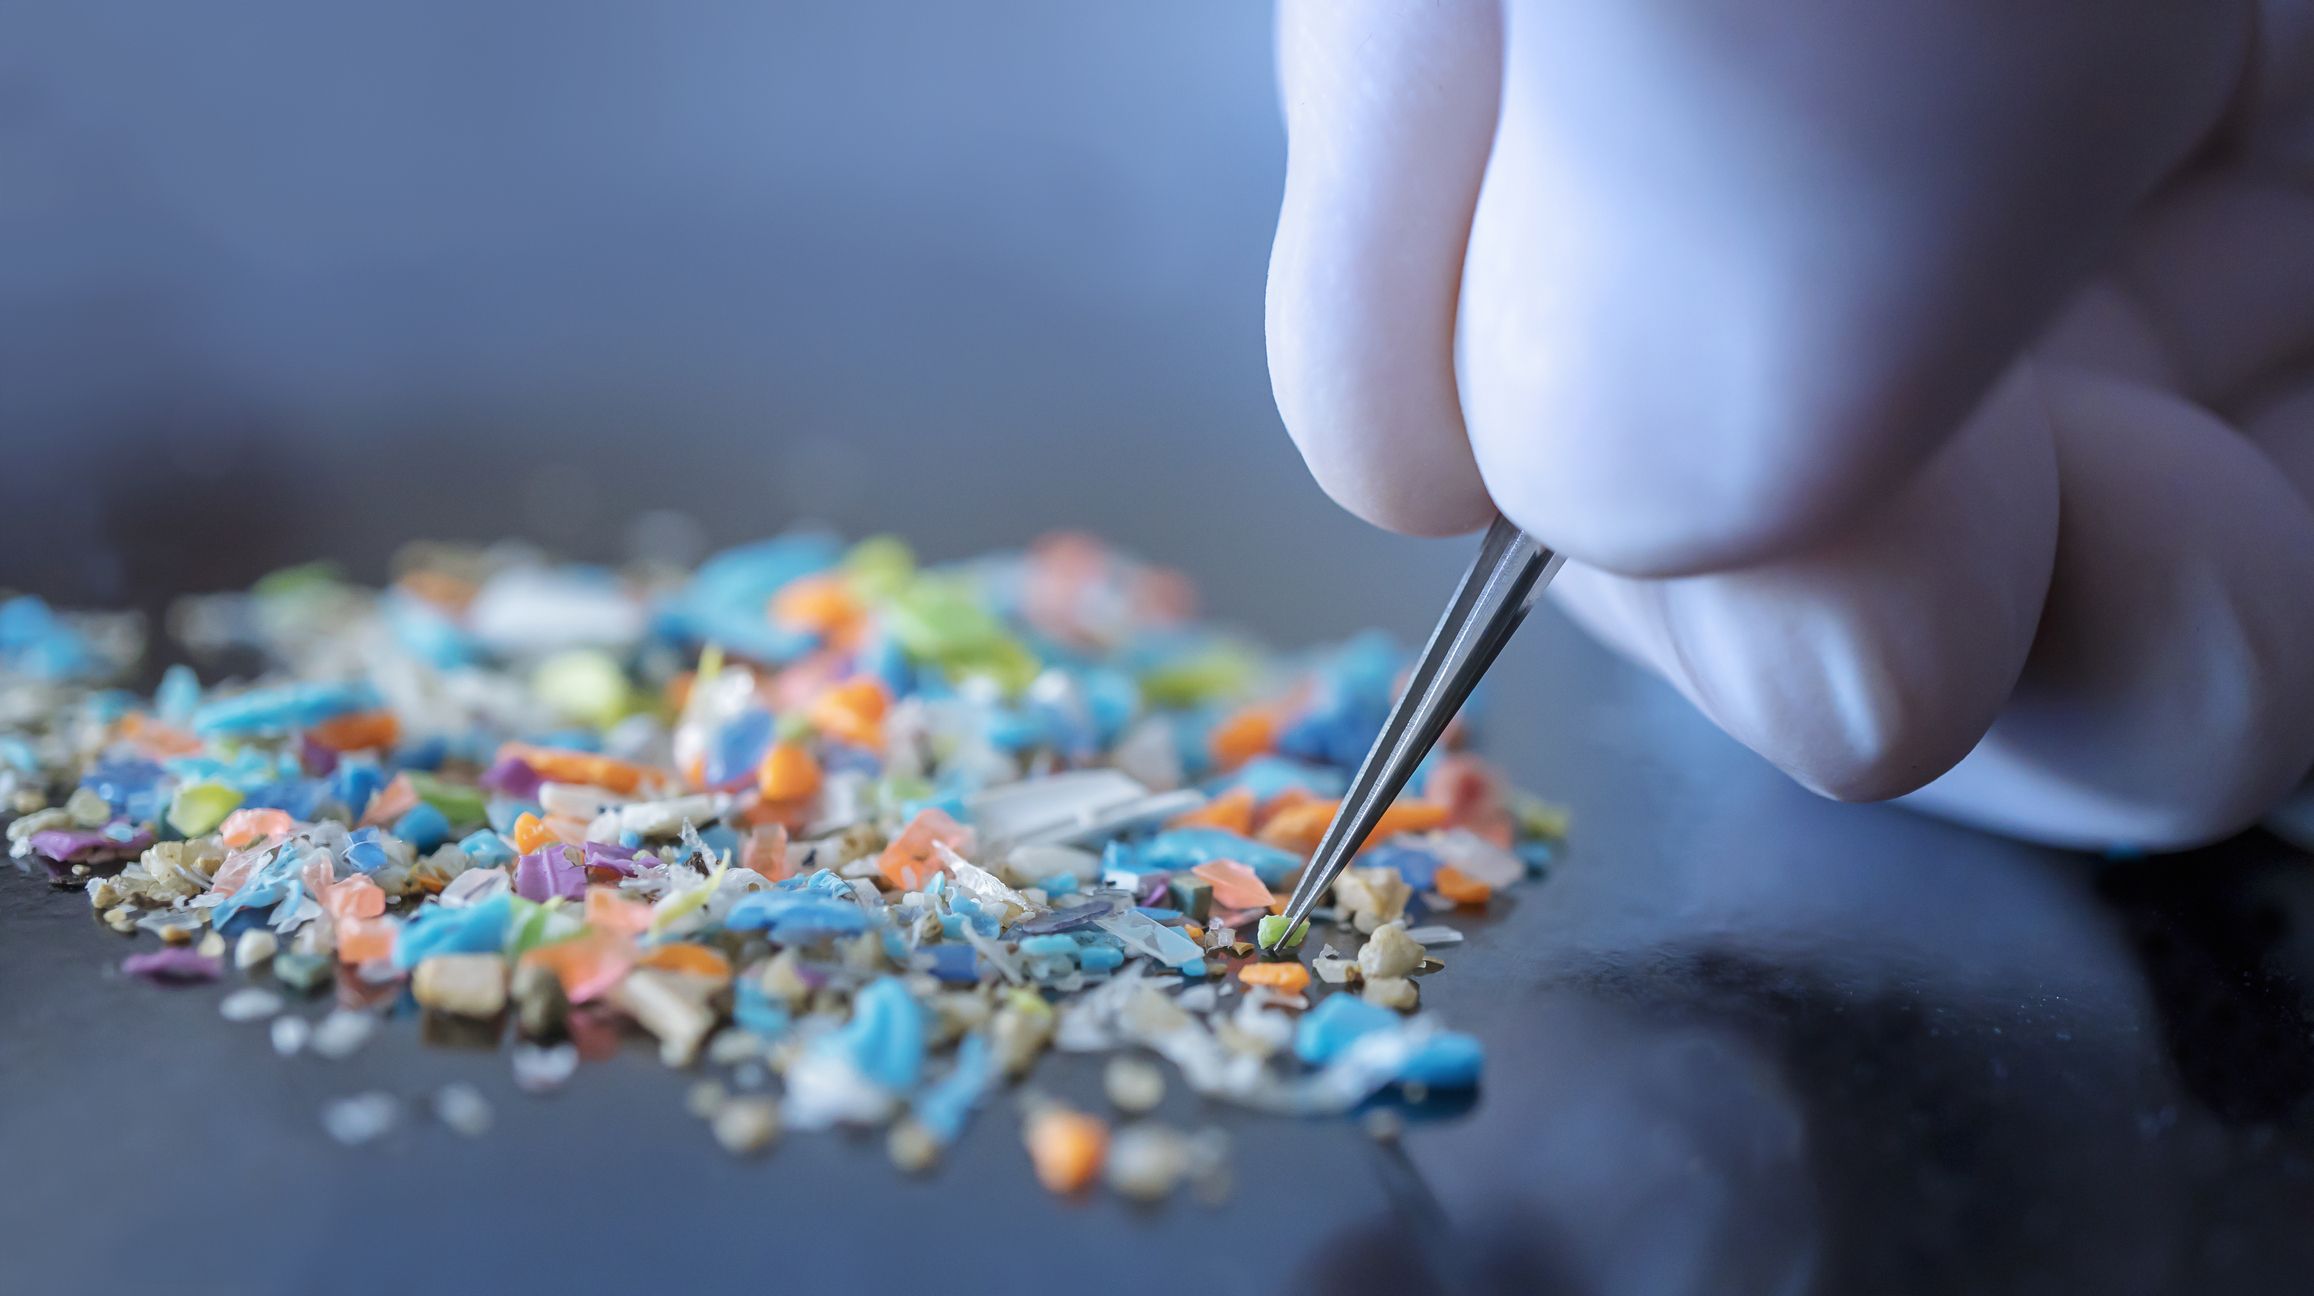 Microplastics Found in Every Human Placenta, Raising Concerns for Fetal Development